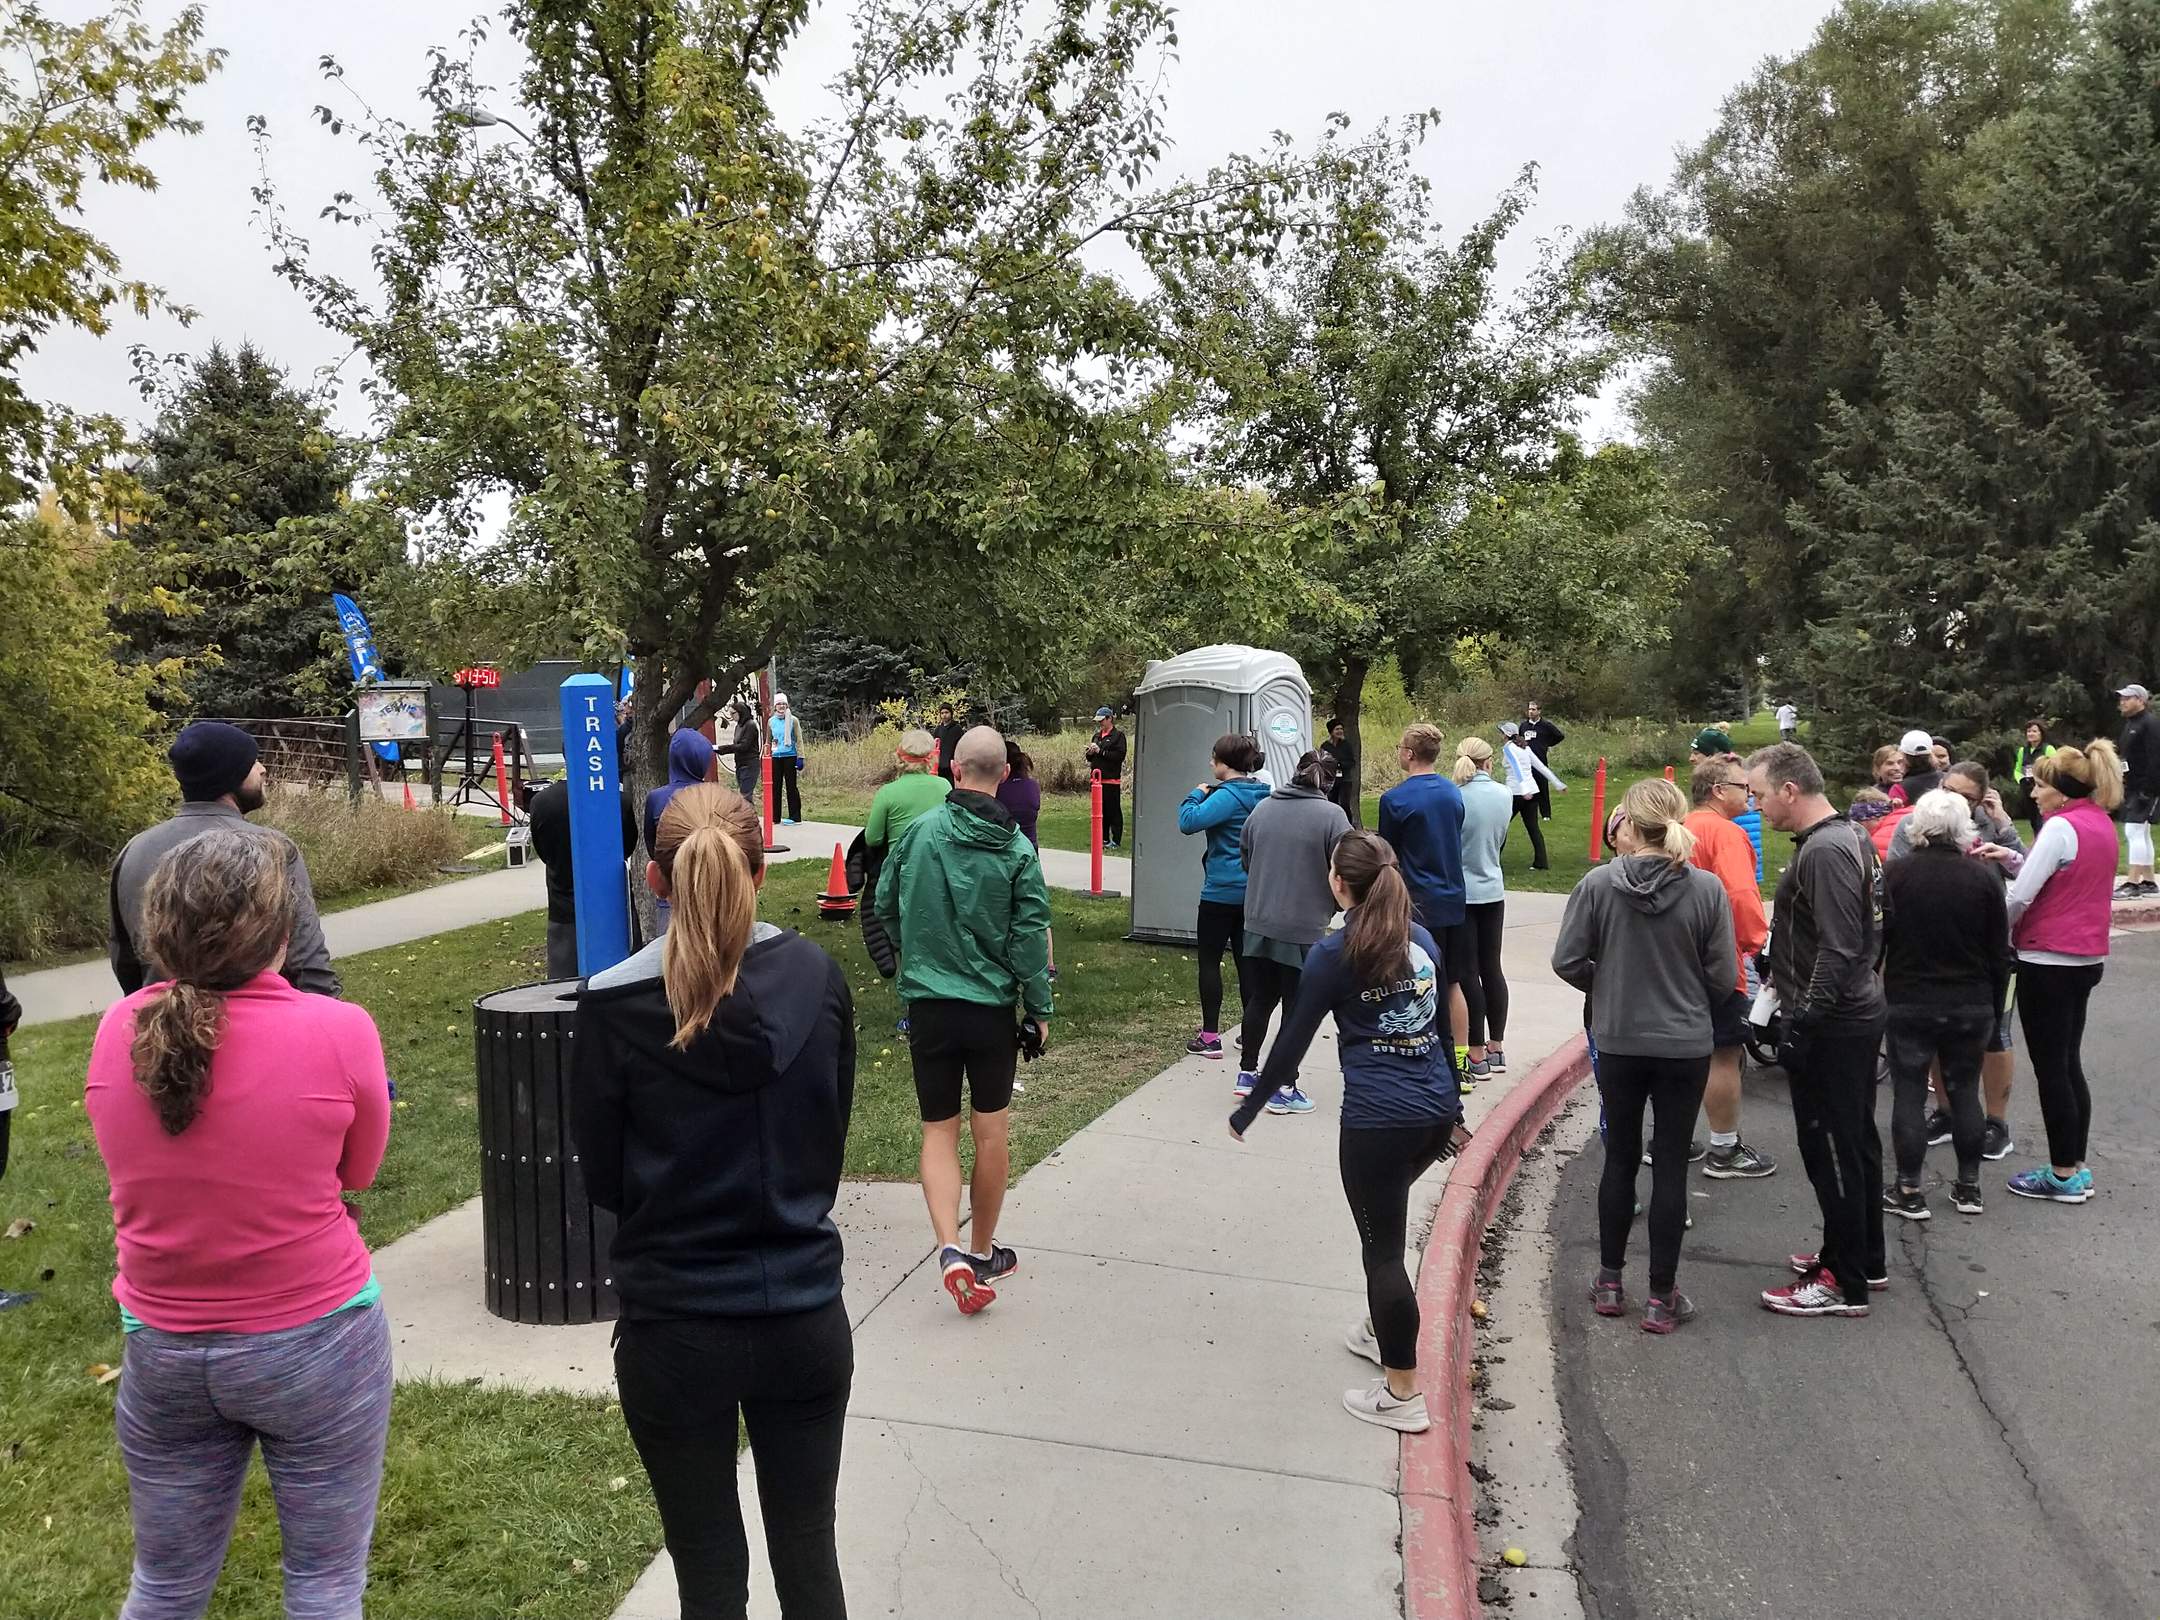 Runners awaiting their start time at the 2018 Rolland Moore Park 4-kilometer Tortoise & Hare race.